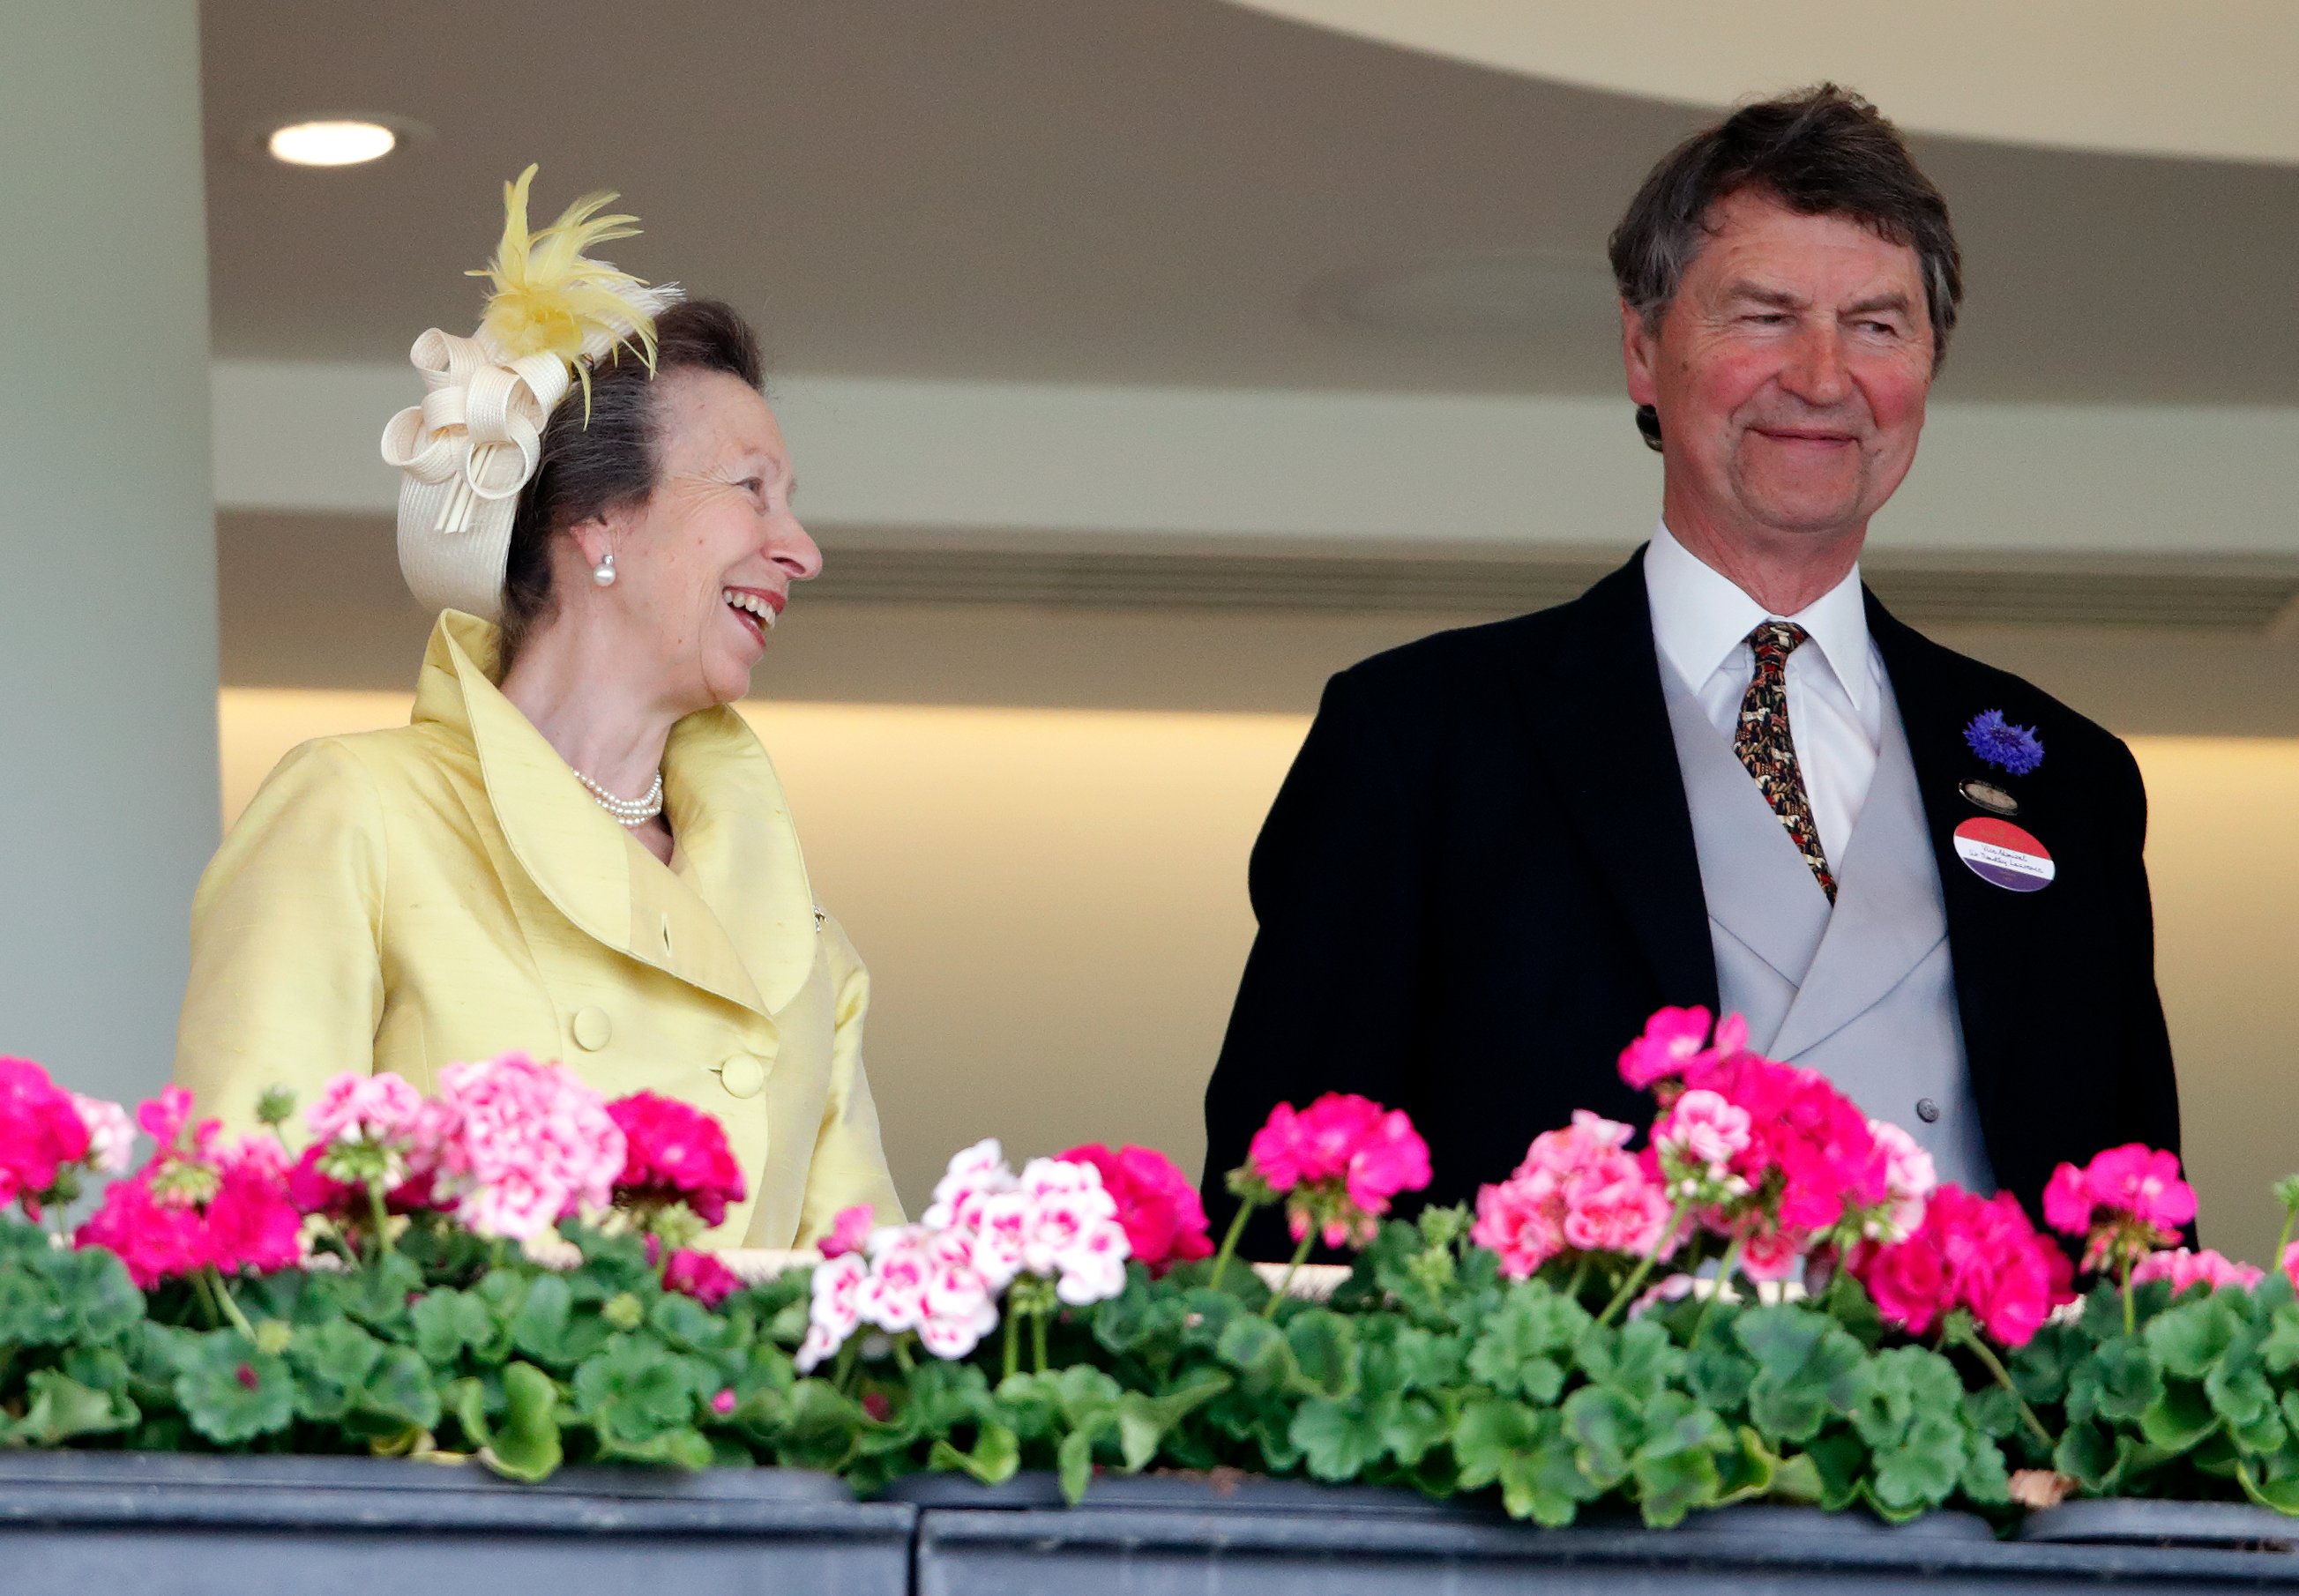 Princess Anne, Princess Royal and Vice Admiral Timothy Laurence attend day 3 of Royal Ascot at Ascot Racecourse on June 17, 2021 in Ascot, England. | Source: Getty Images